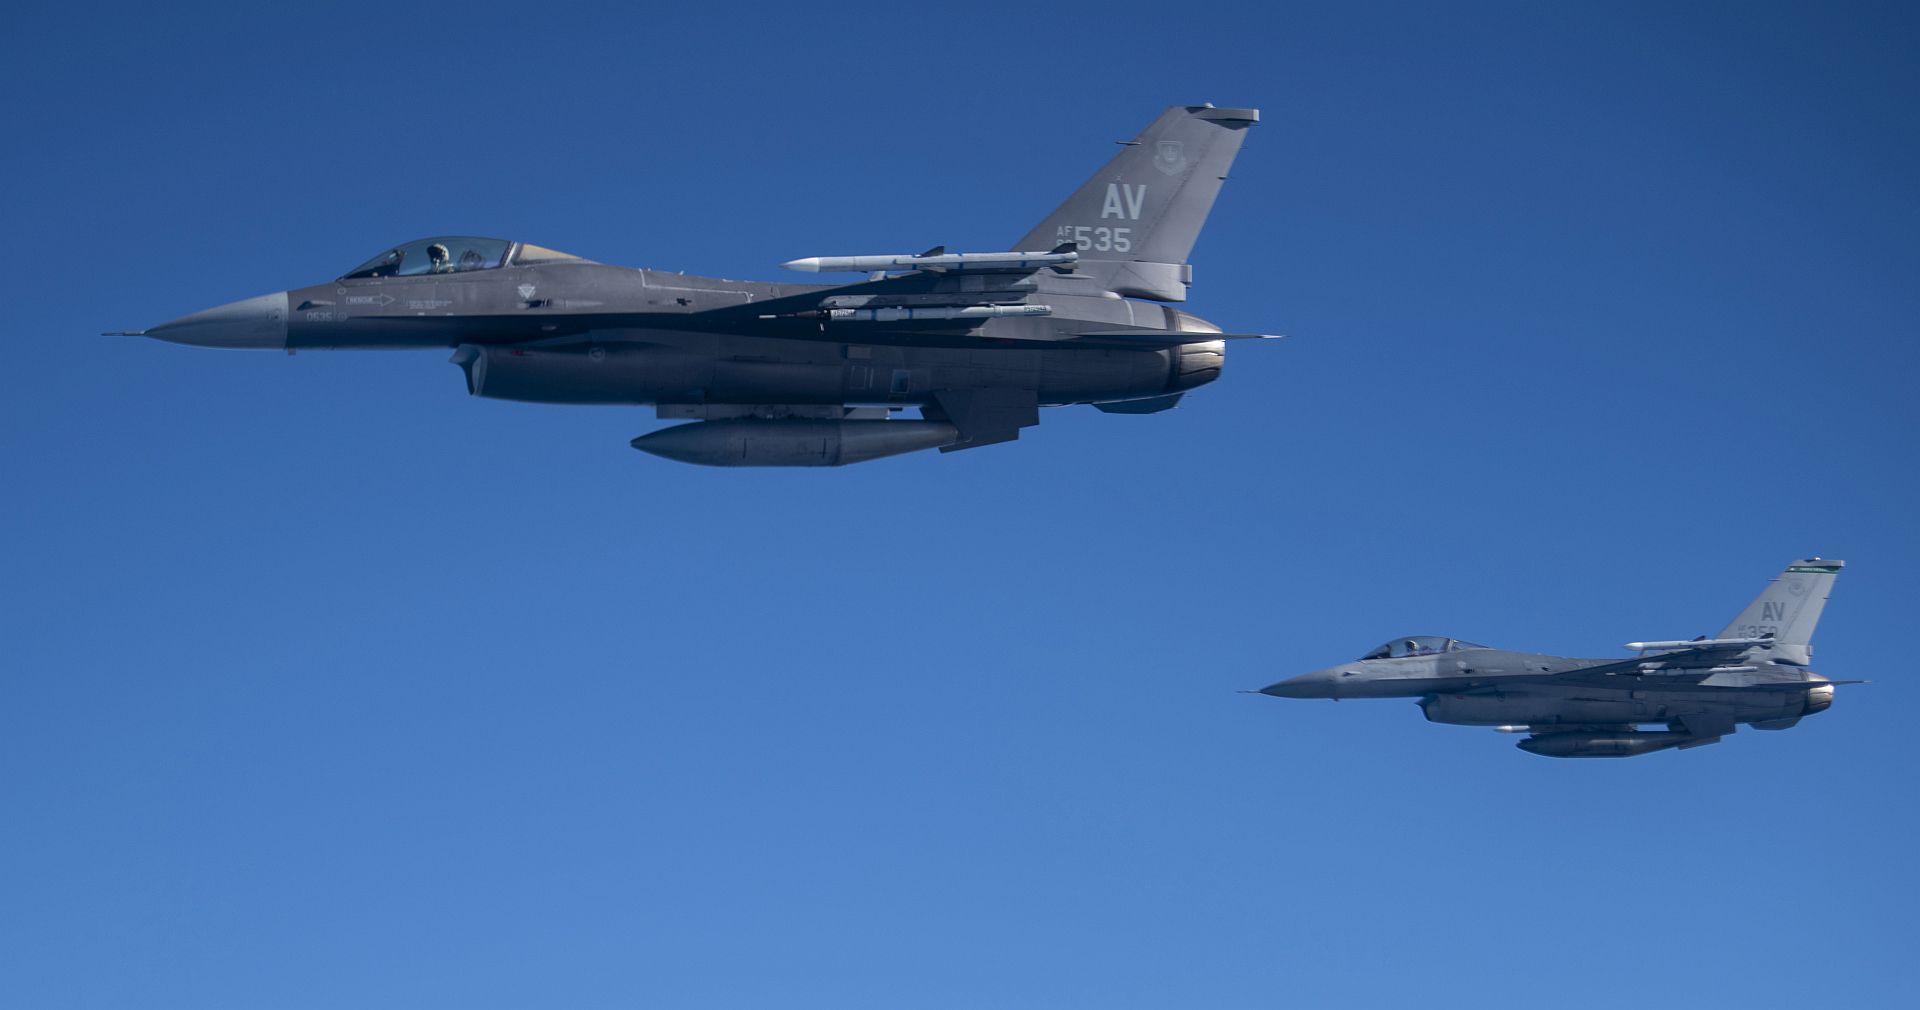 F 16 Fighting Falcon Aircraft Assigned To The 555th Fighter Squadron Aviano Air Base Italy Fly Next To A KC 135 Stratotanker